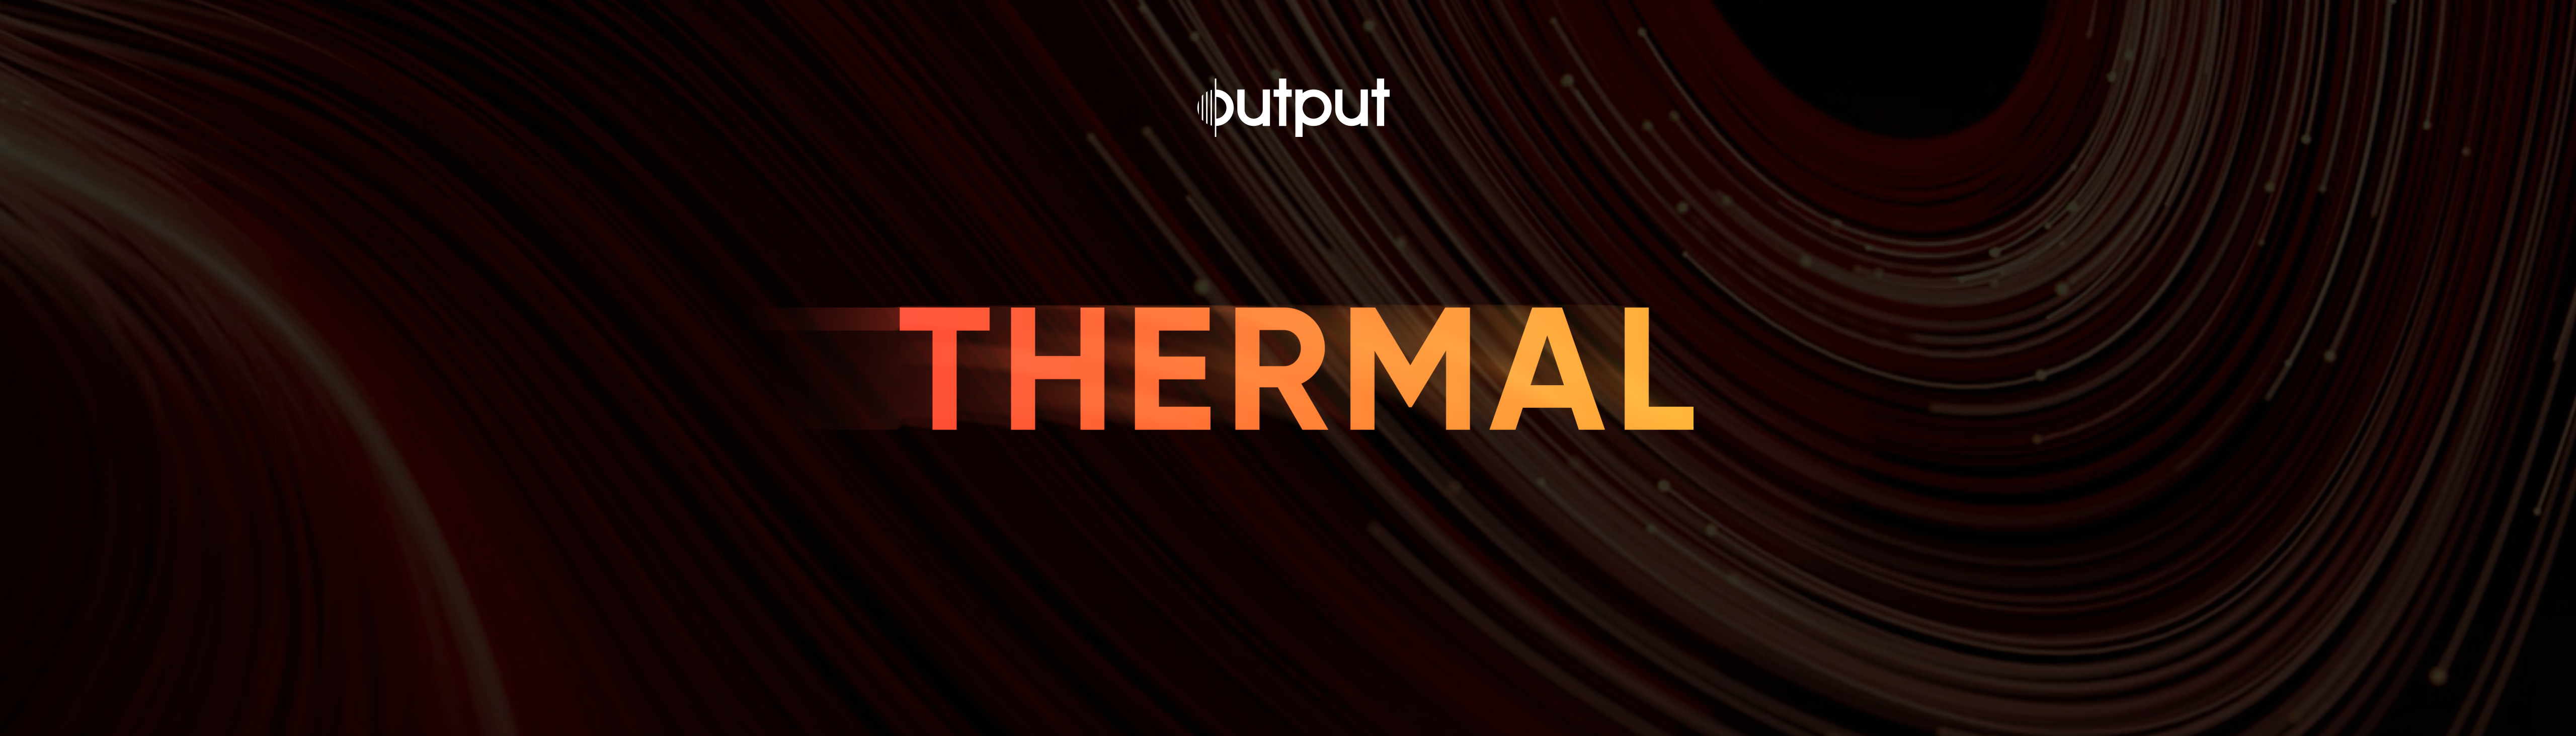 Output THERMAL